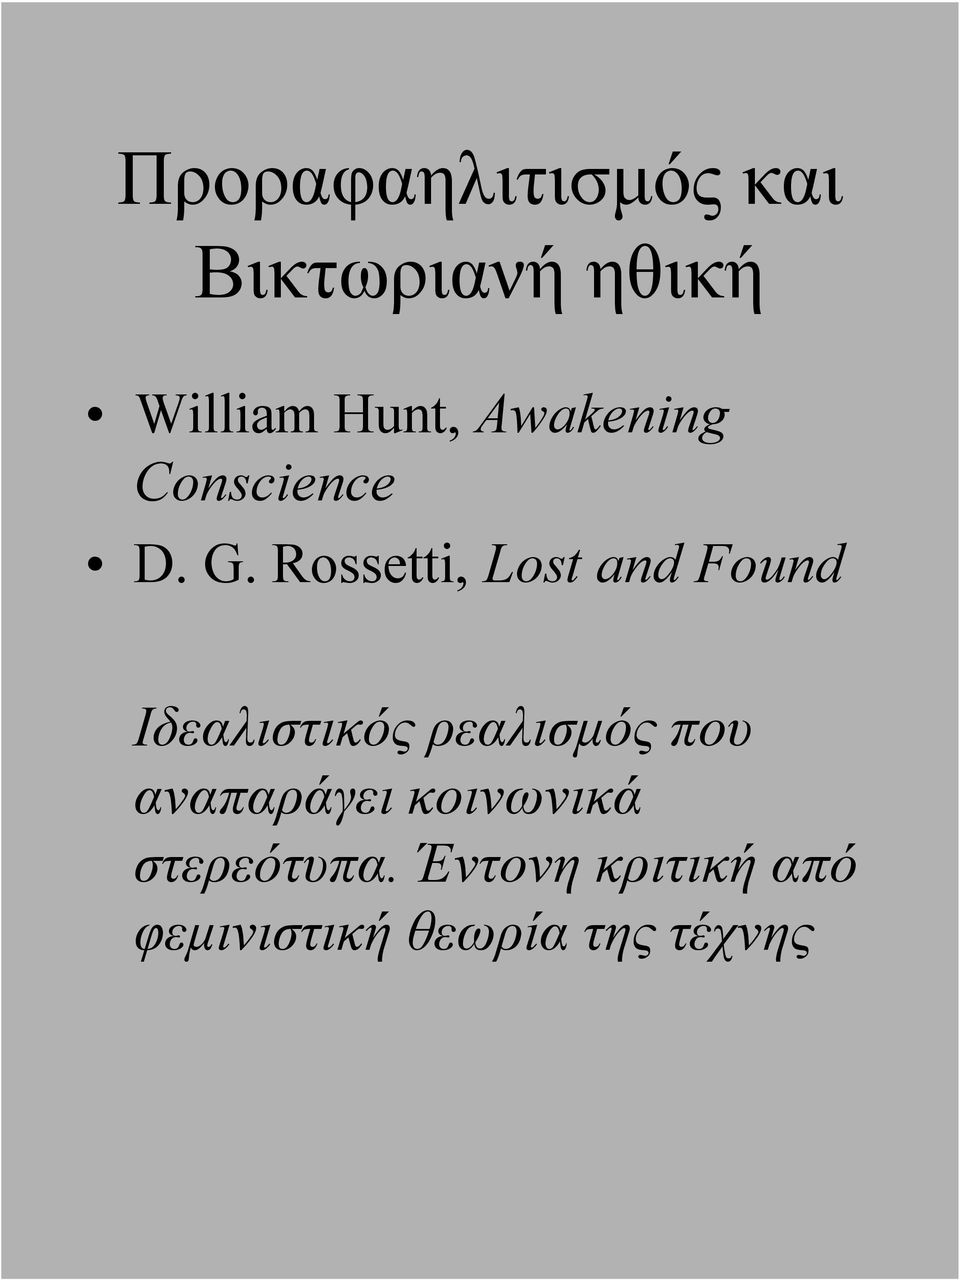 Rossetti, Lost and Found Ιδεαλιστικός ρεαλισμός που